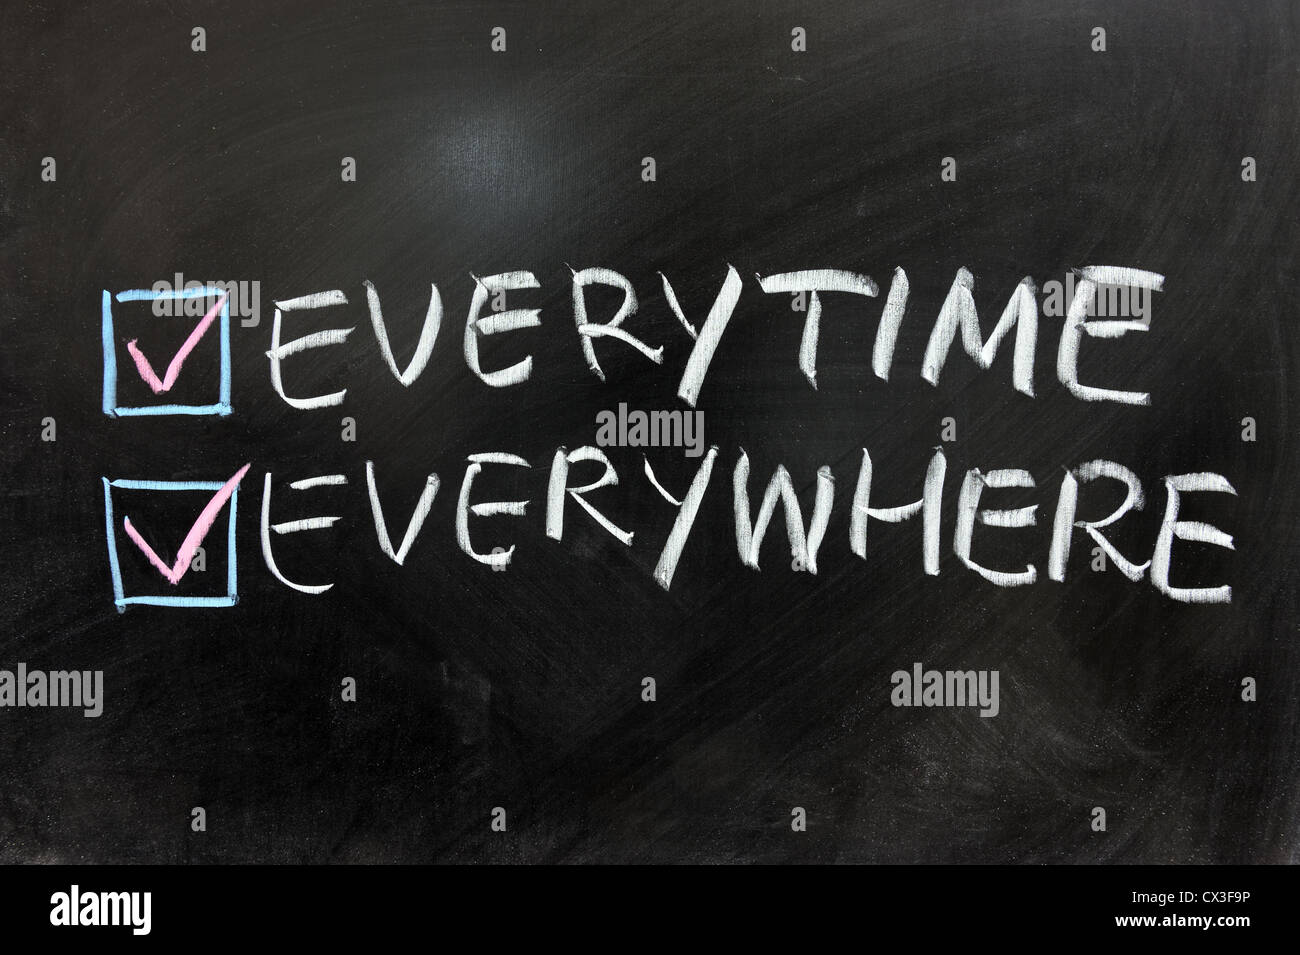 Check box of everytime and everywhere on chalkboard Stock Photo